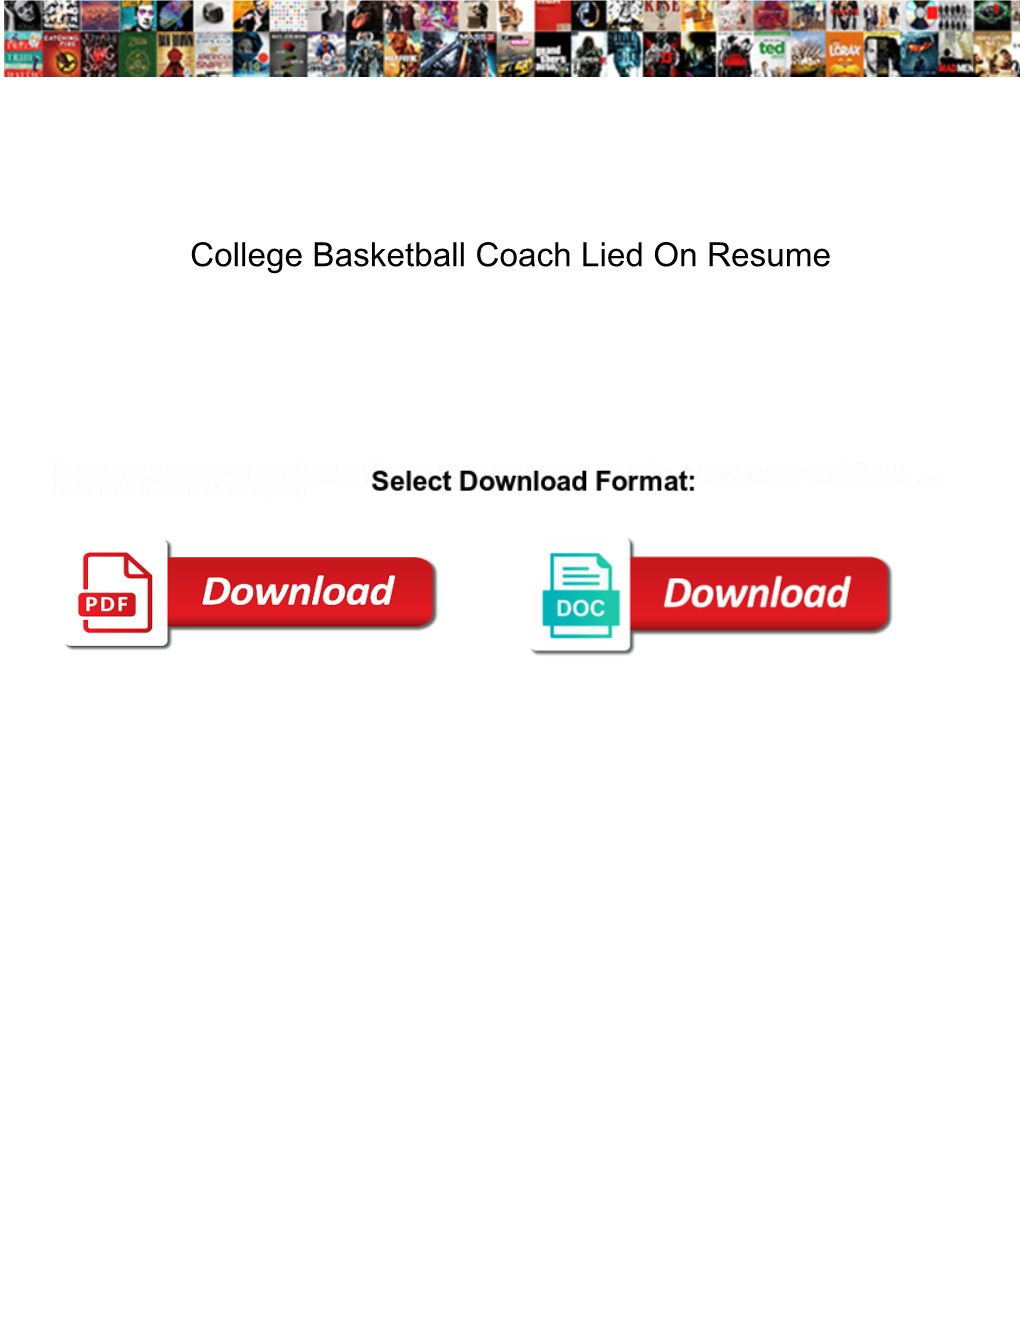 College Basketball Coach Lied on Resume